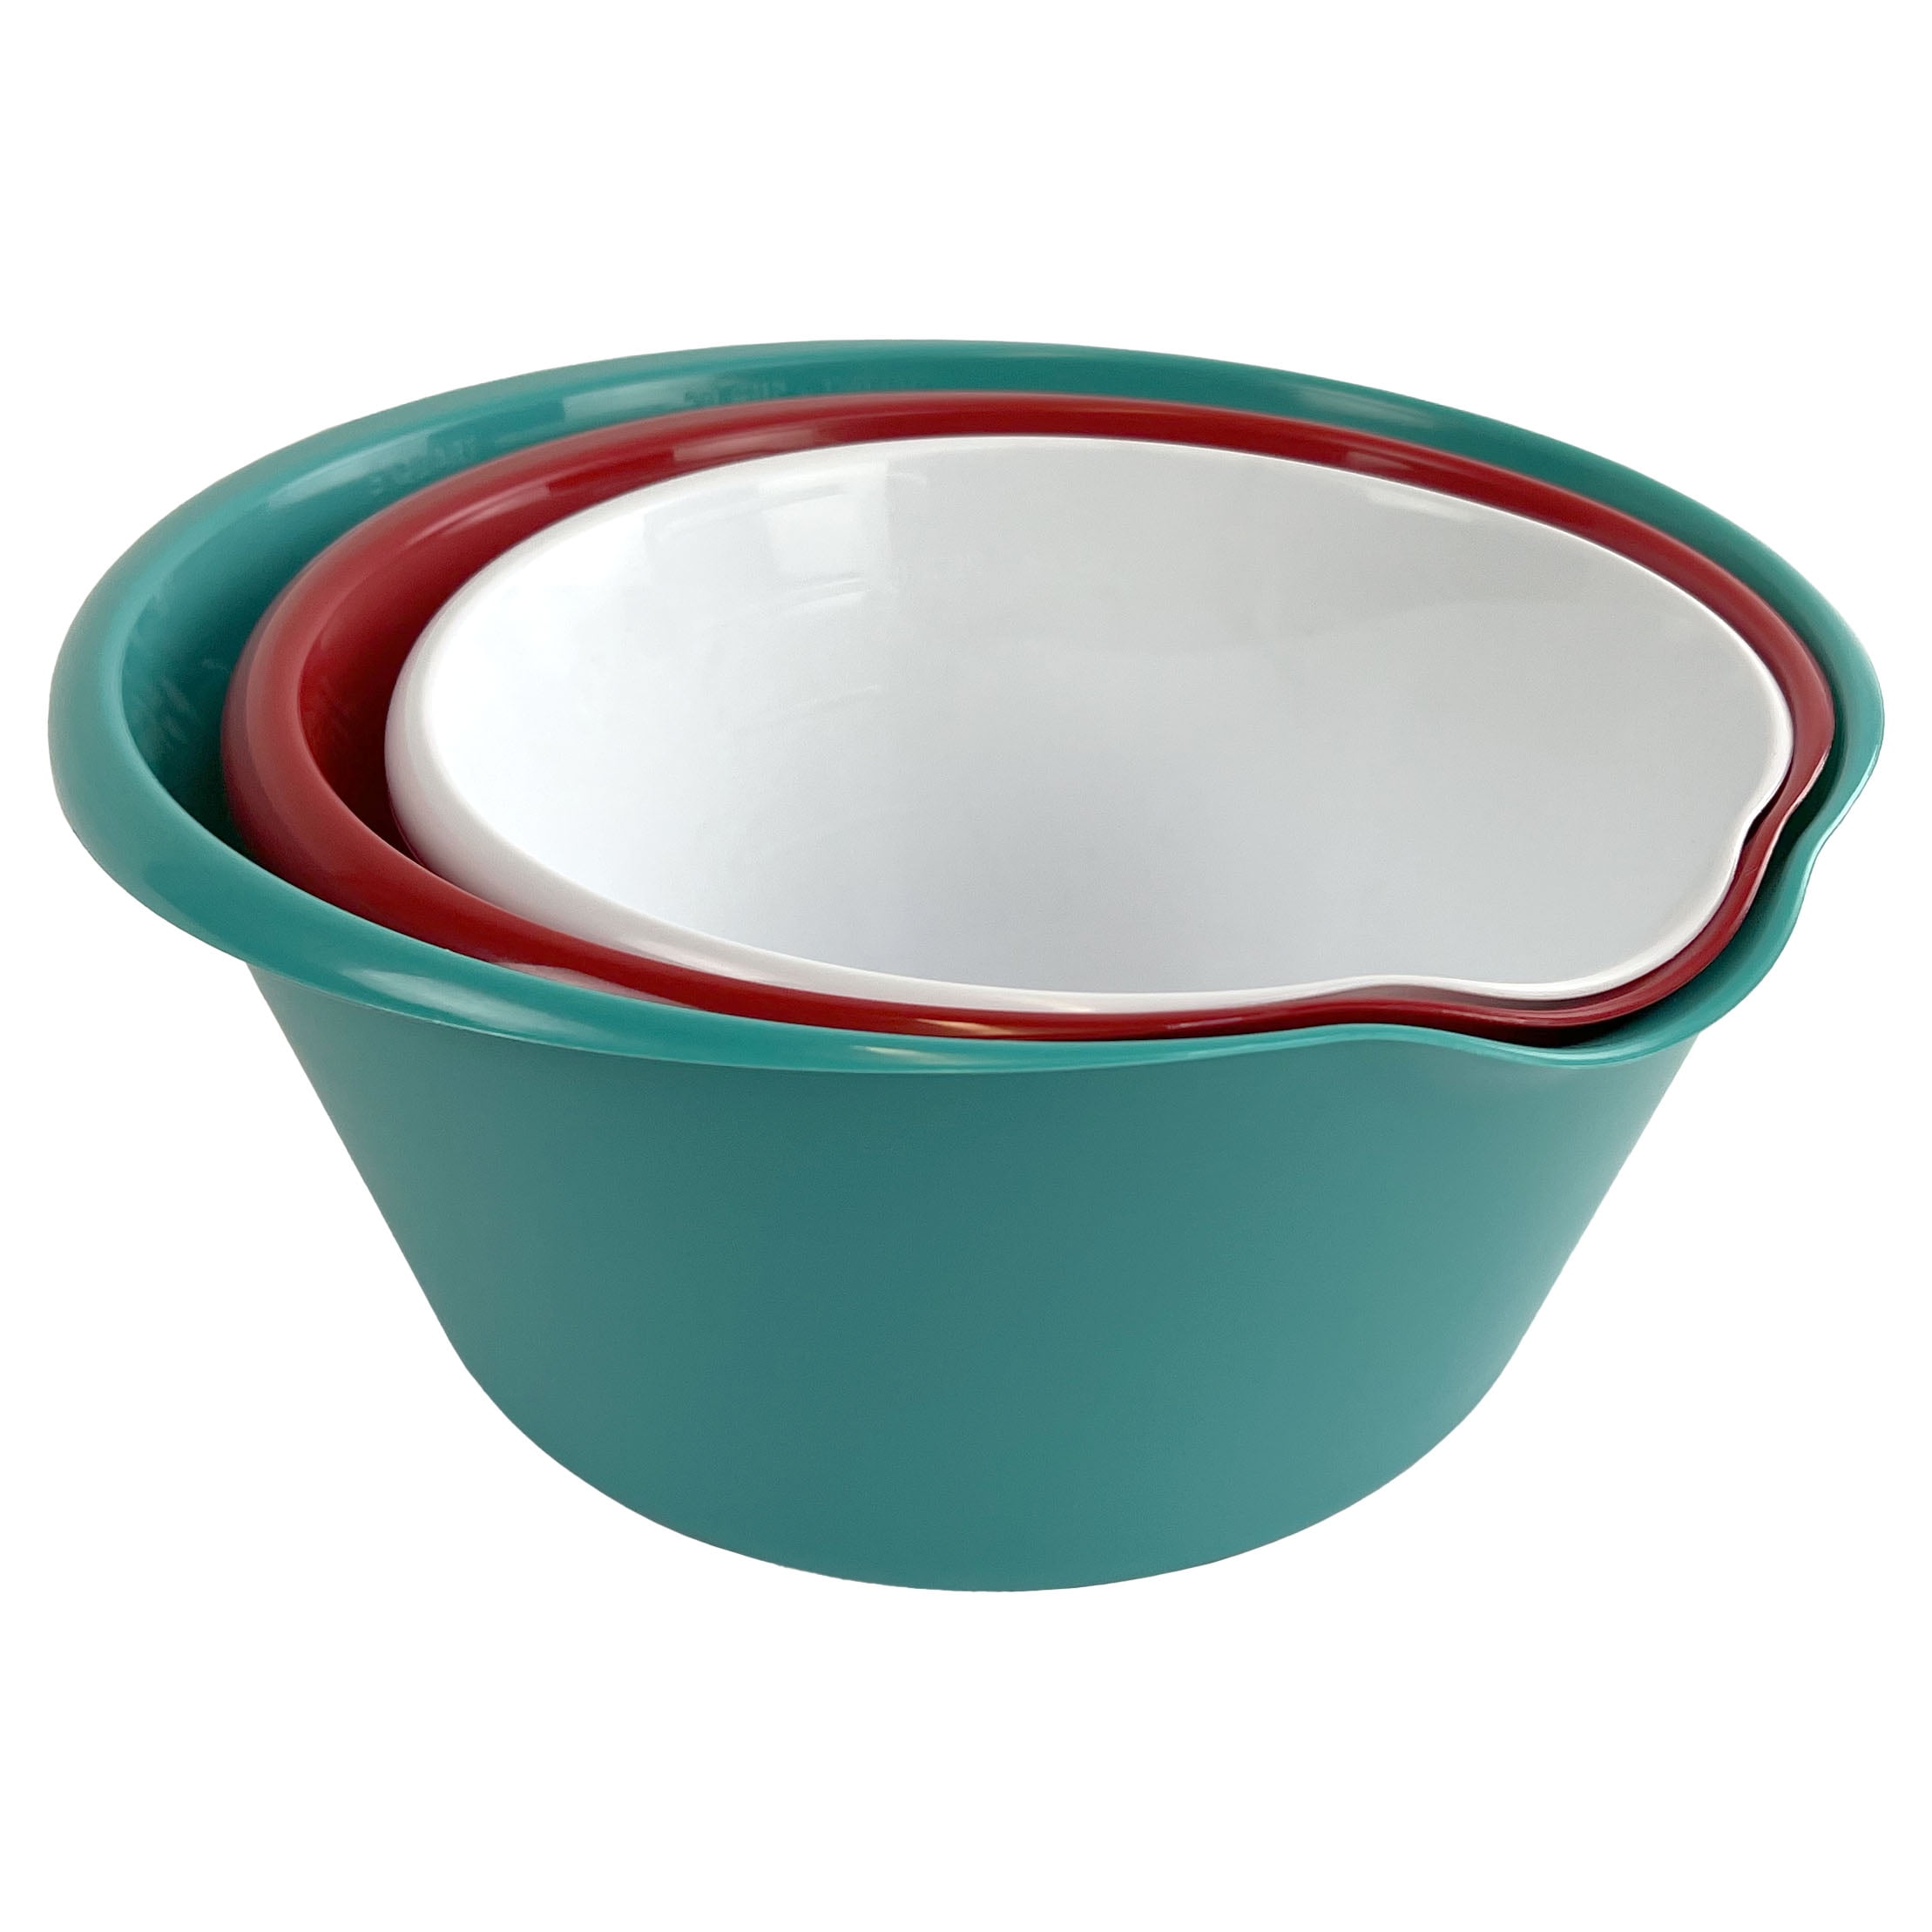 Tupperware Large Bowl With Lid White Color Mixing Bowl or 